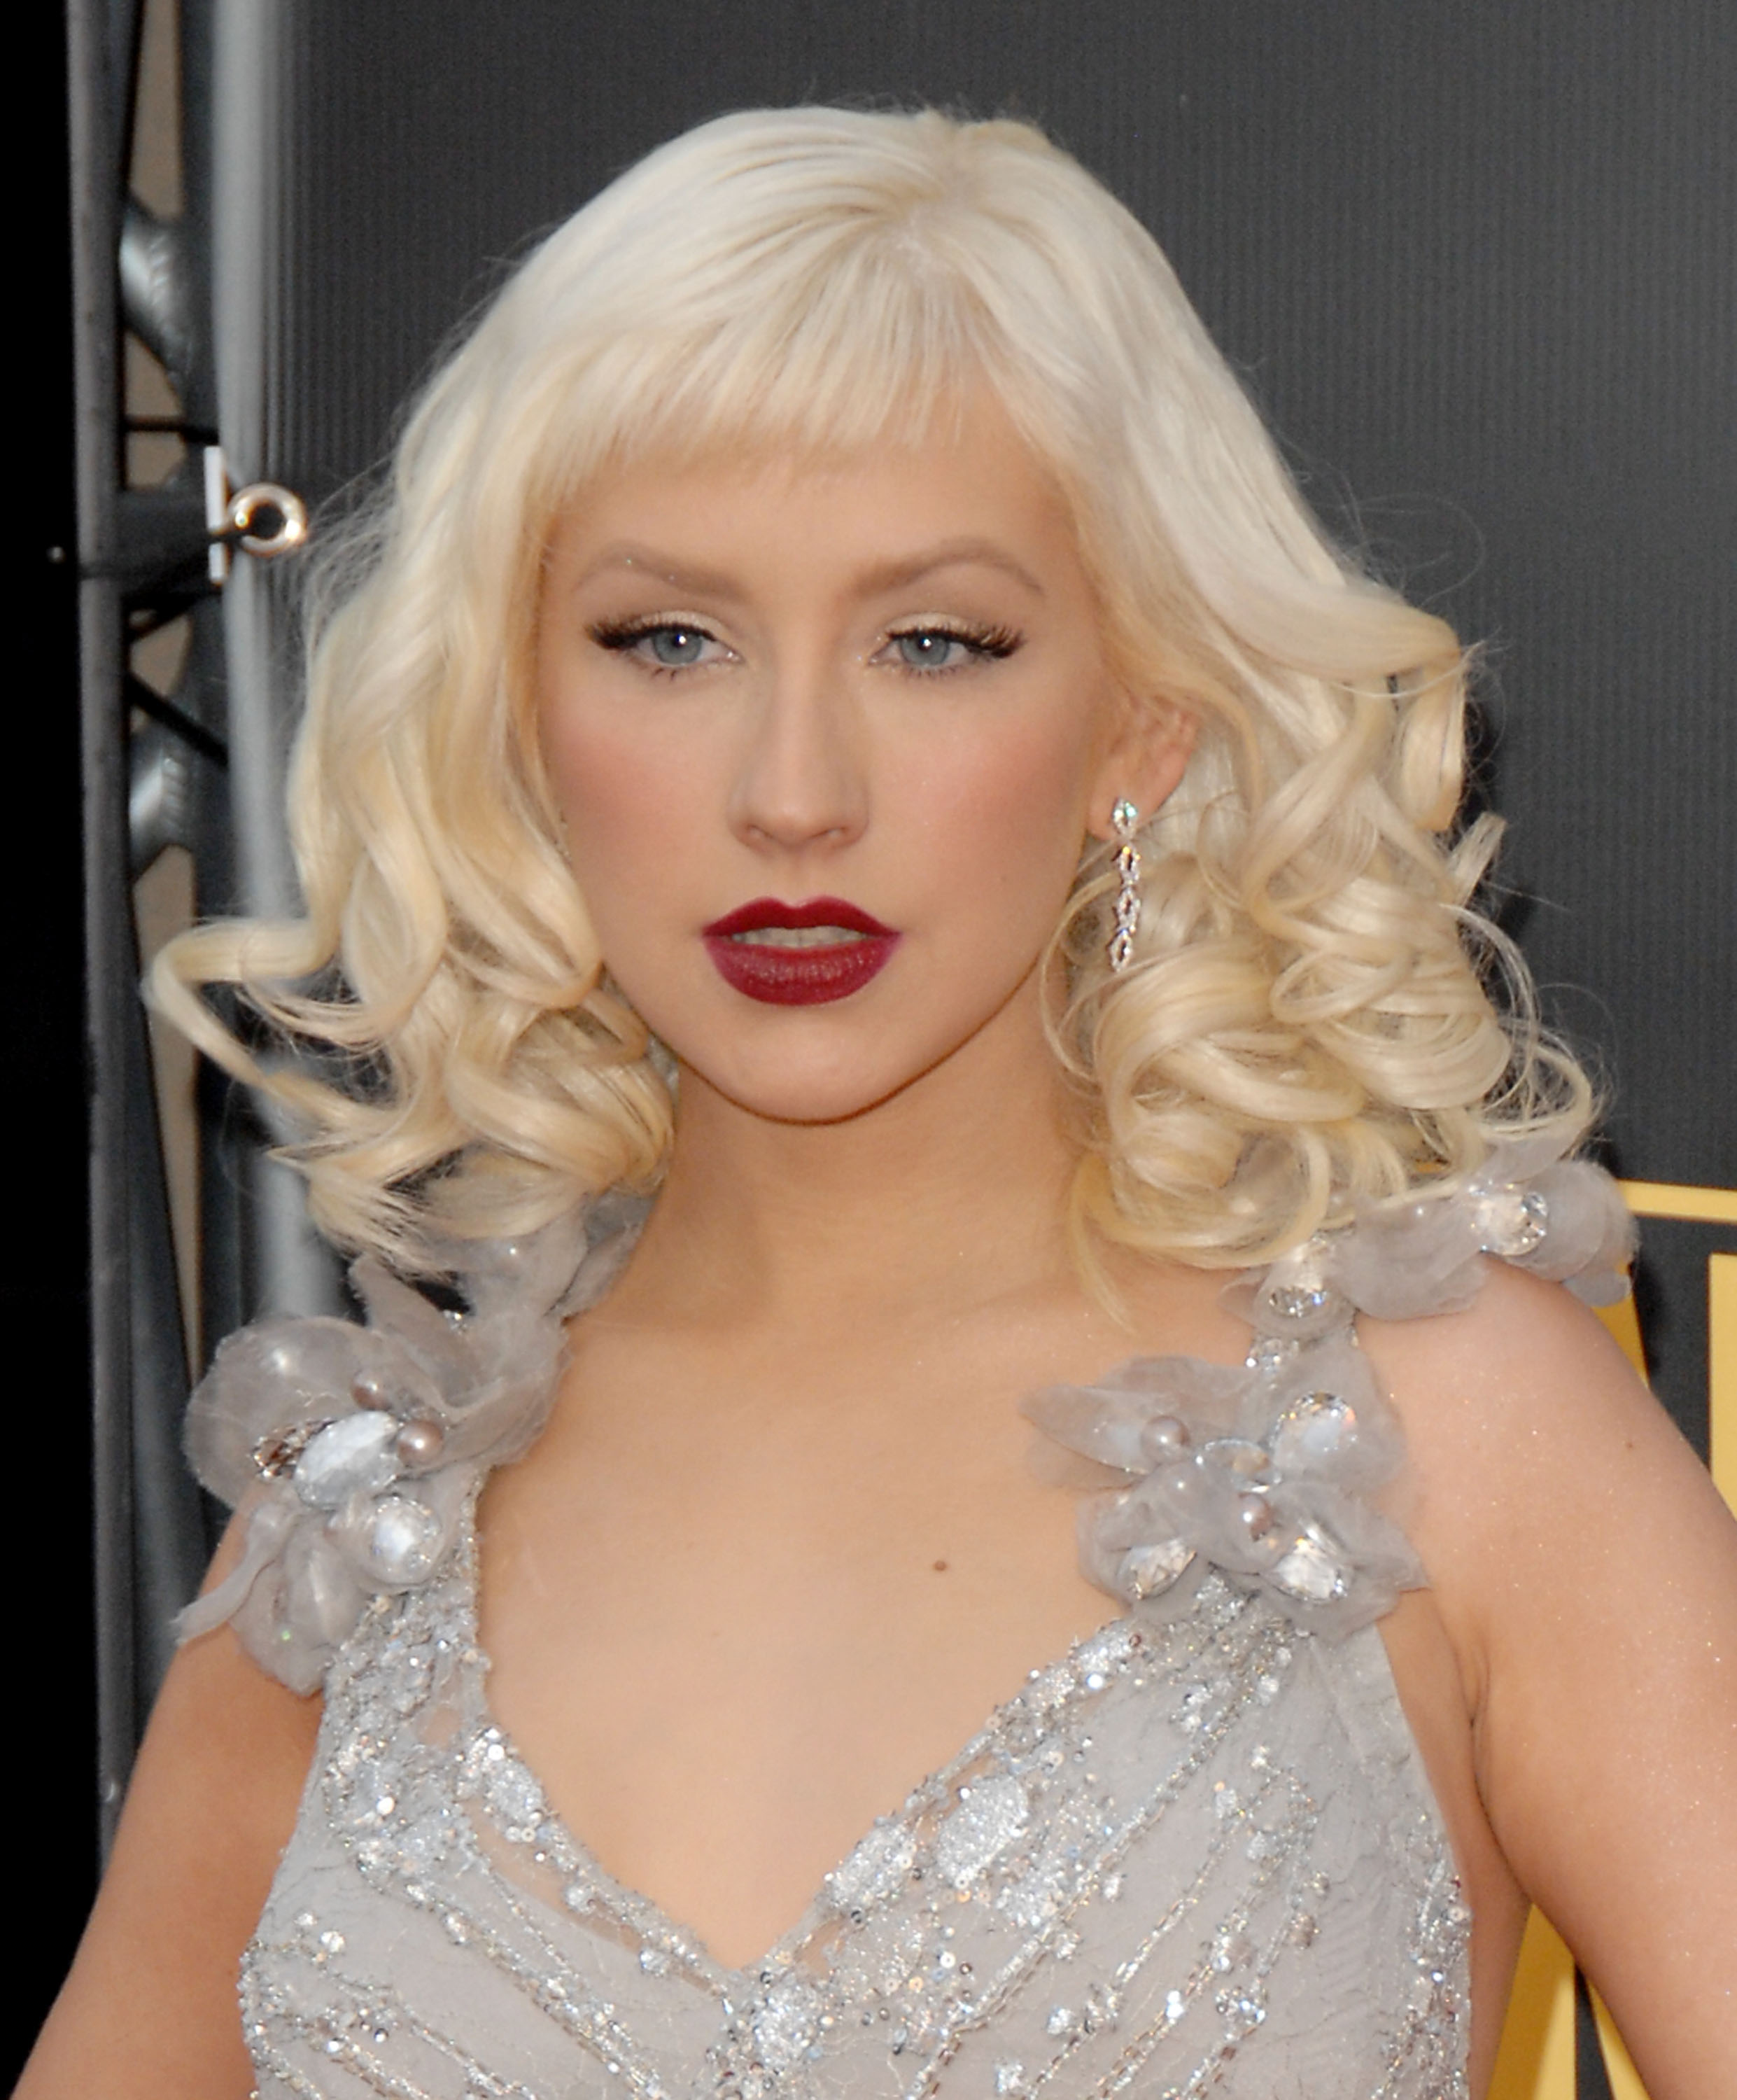 Christina Aguilera at the American Music Awards on November 23, 2008 in Los Angeles, California. | Source: Getty Images